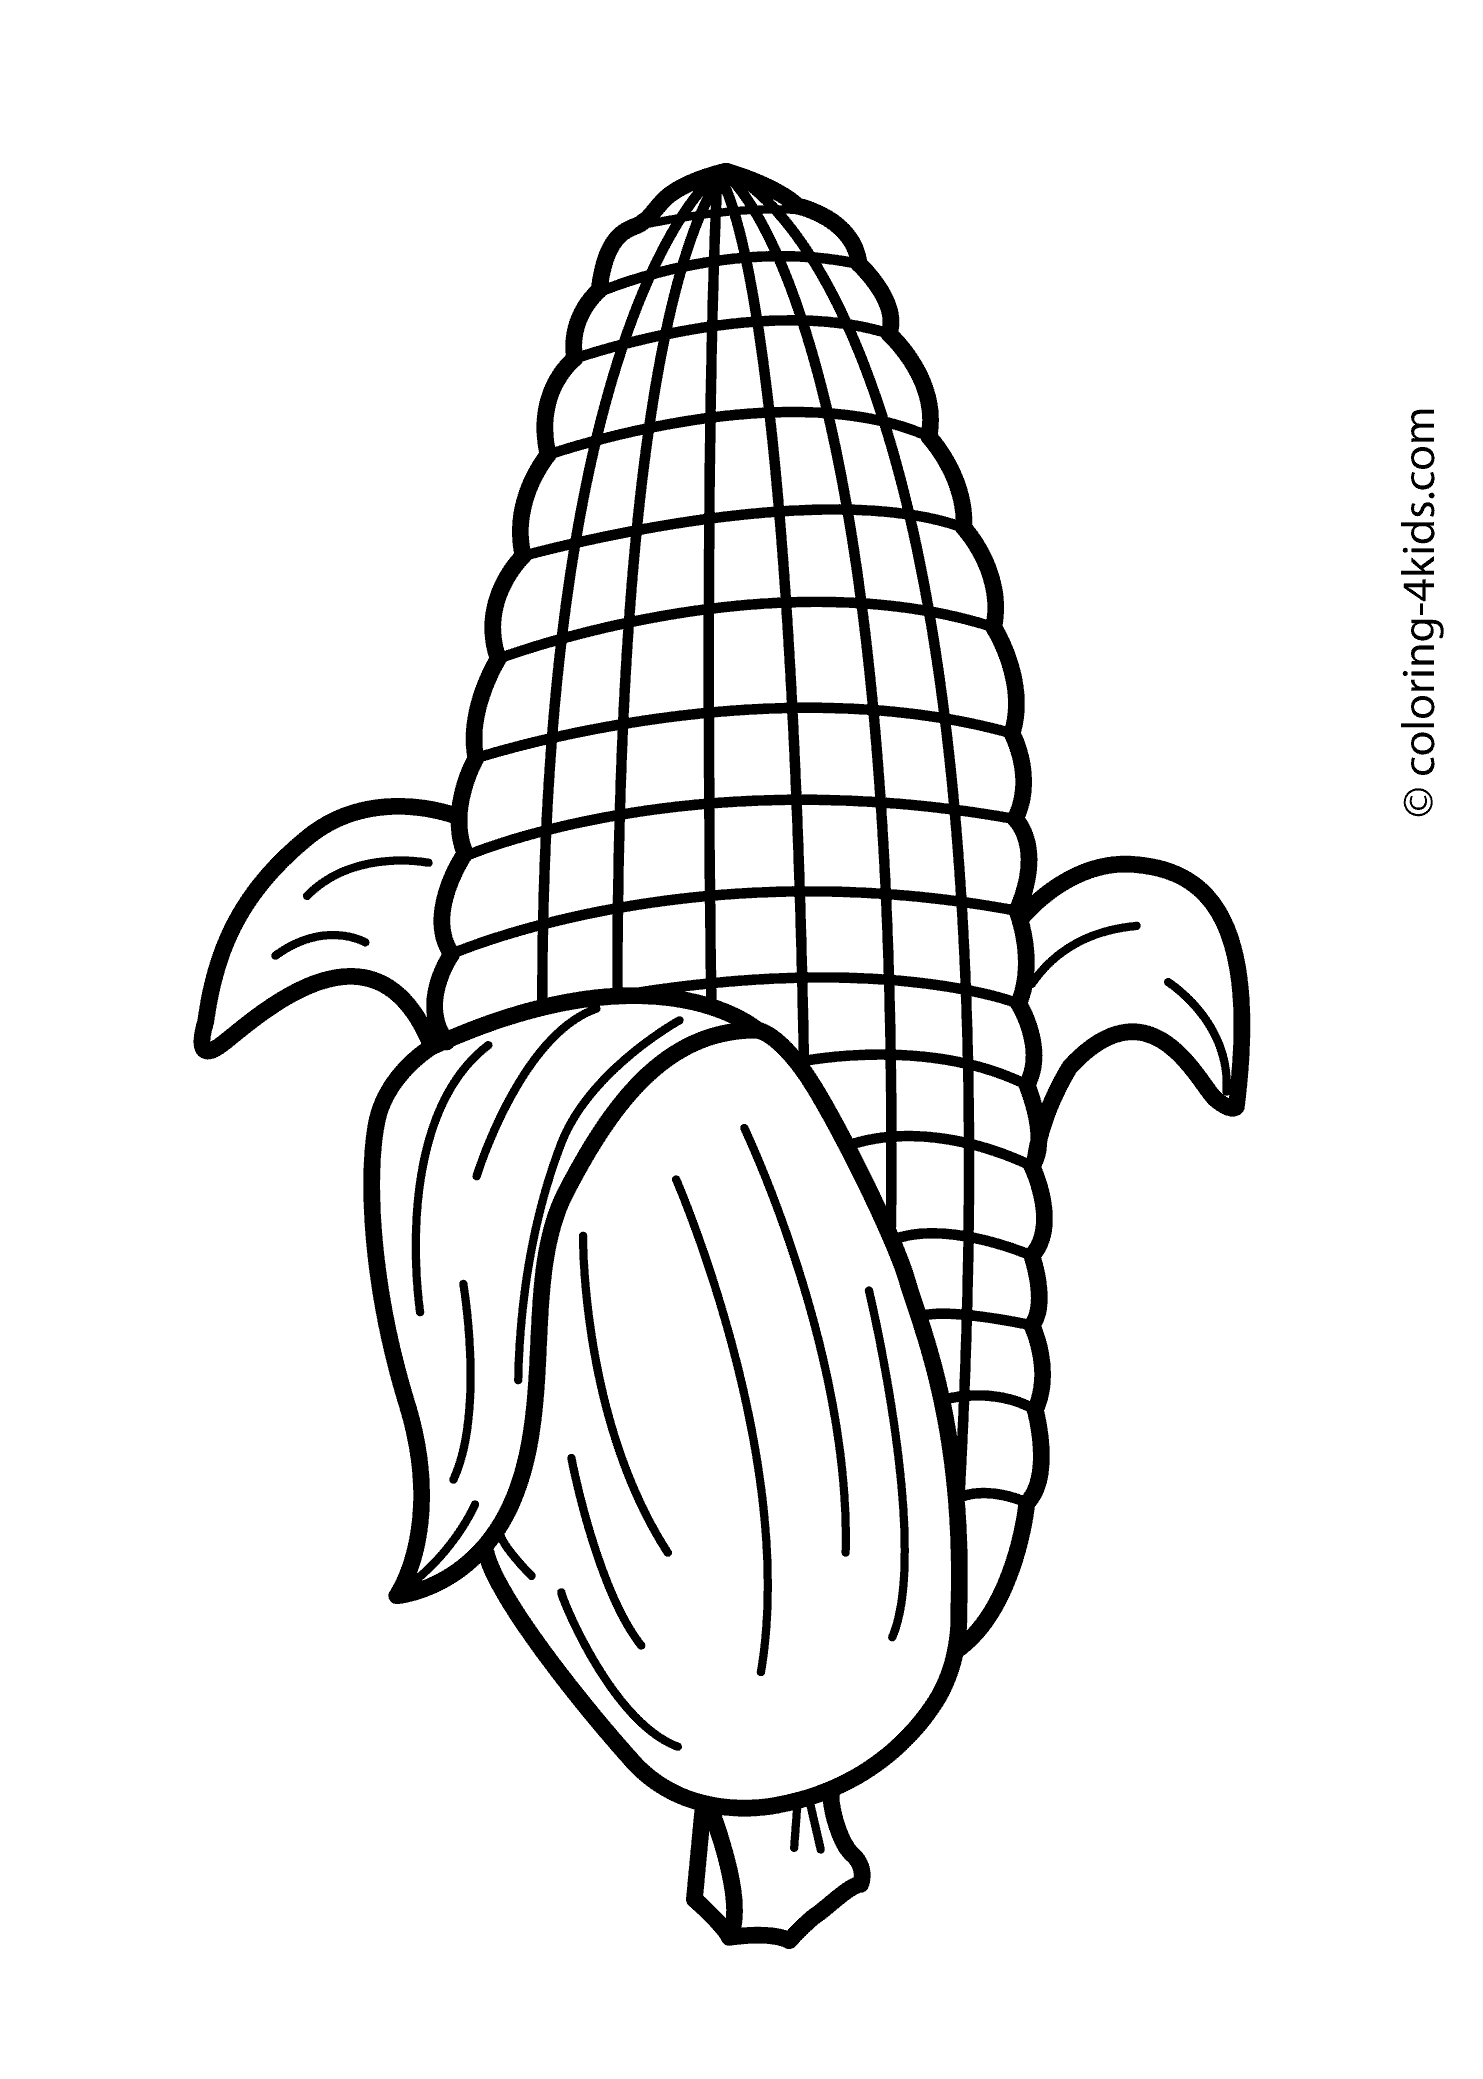 vegetable colouring pictures vegetable coloring pages best coloring pages for kids pictures vegetable colouring 